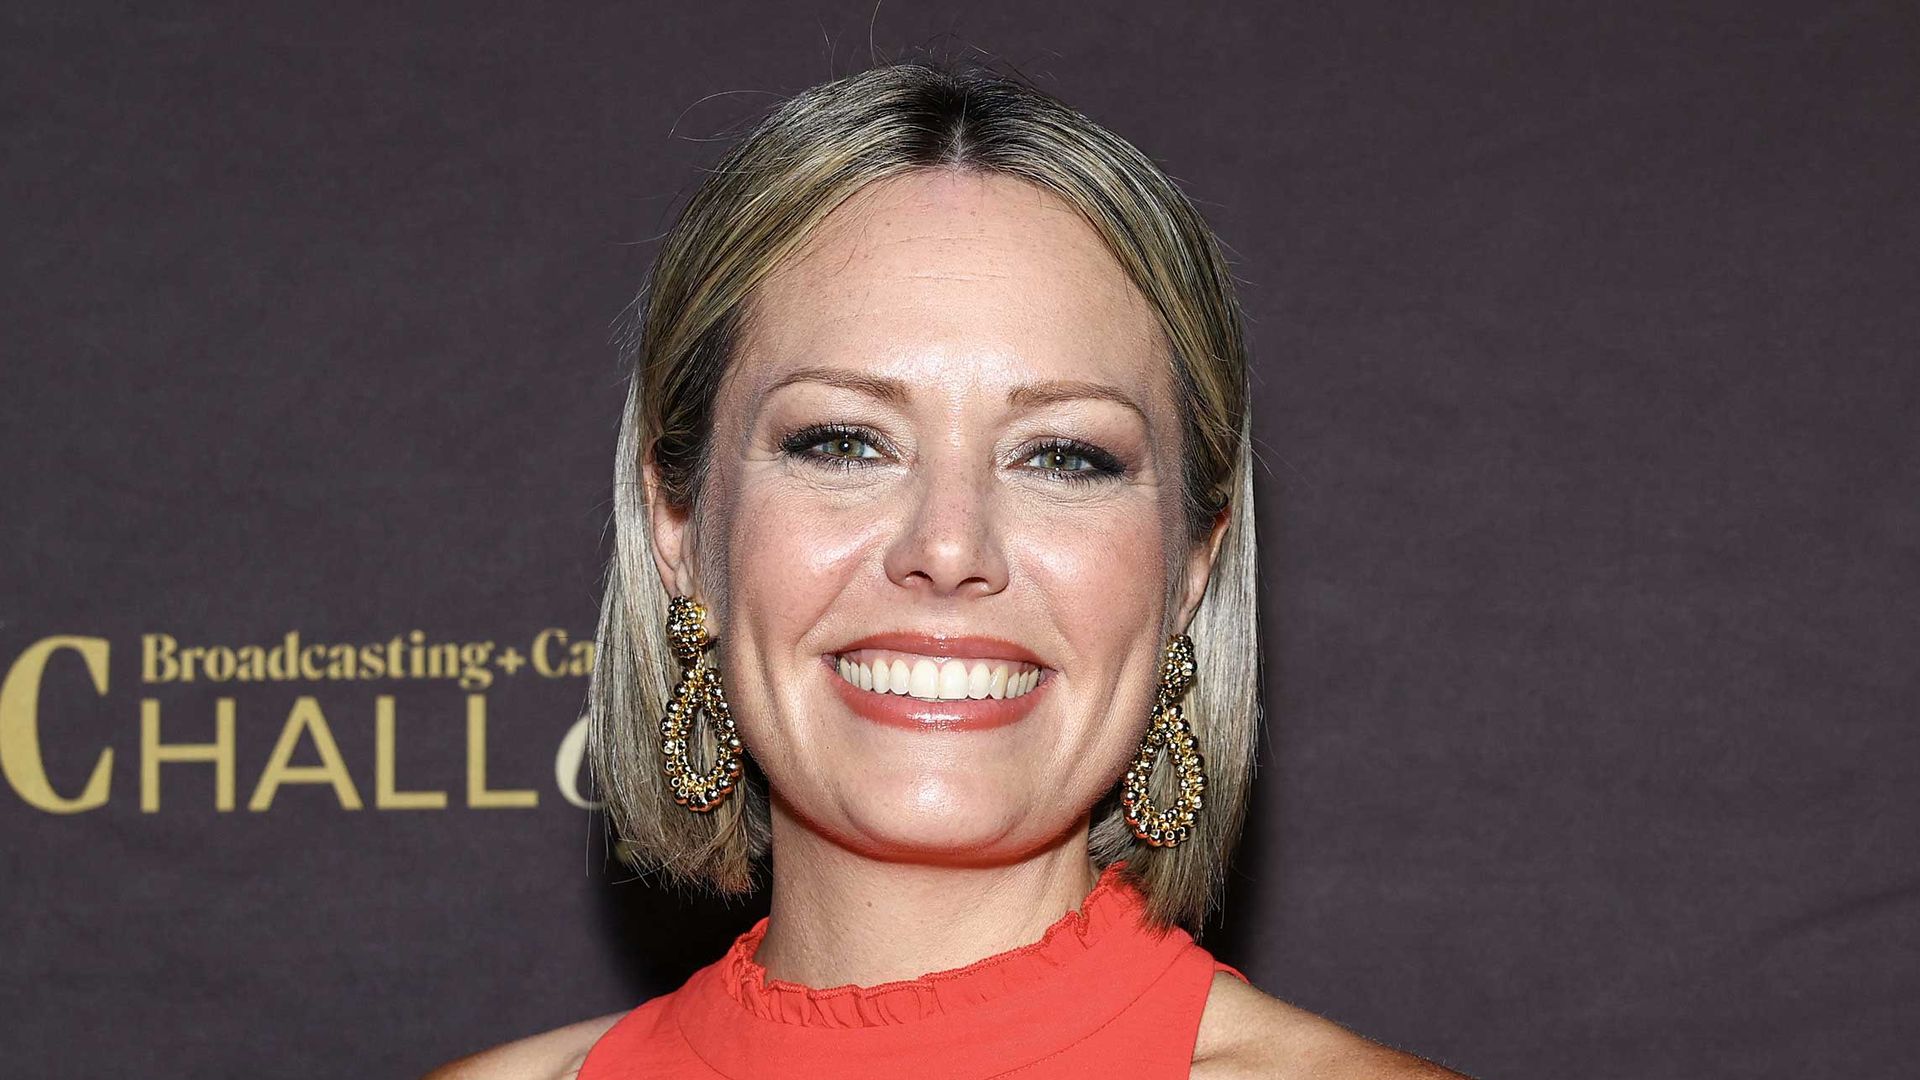 Dylan Dreyer attends the 2023 Broadcasting + Cable Hall Of Fame Gala in NYC